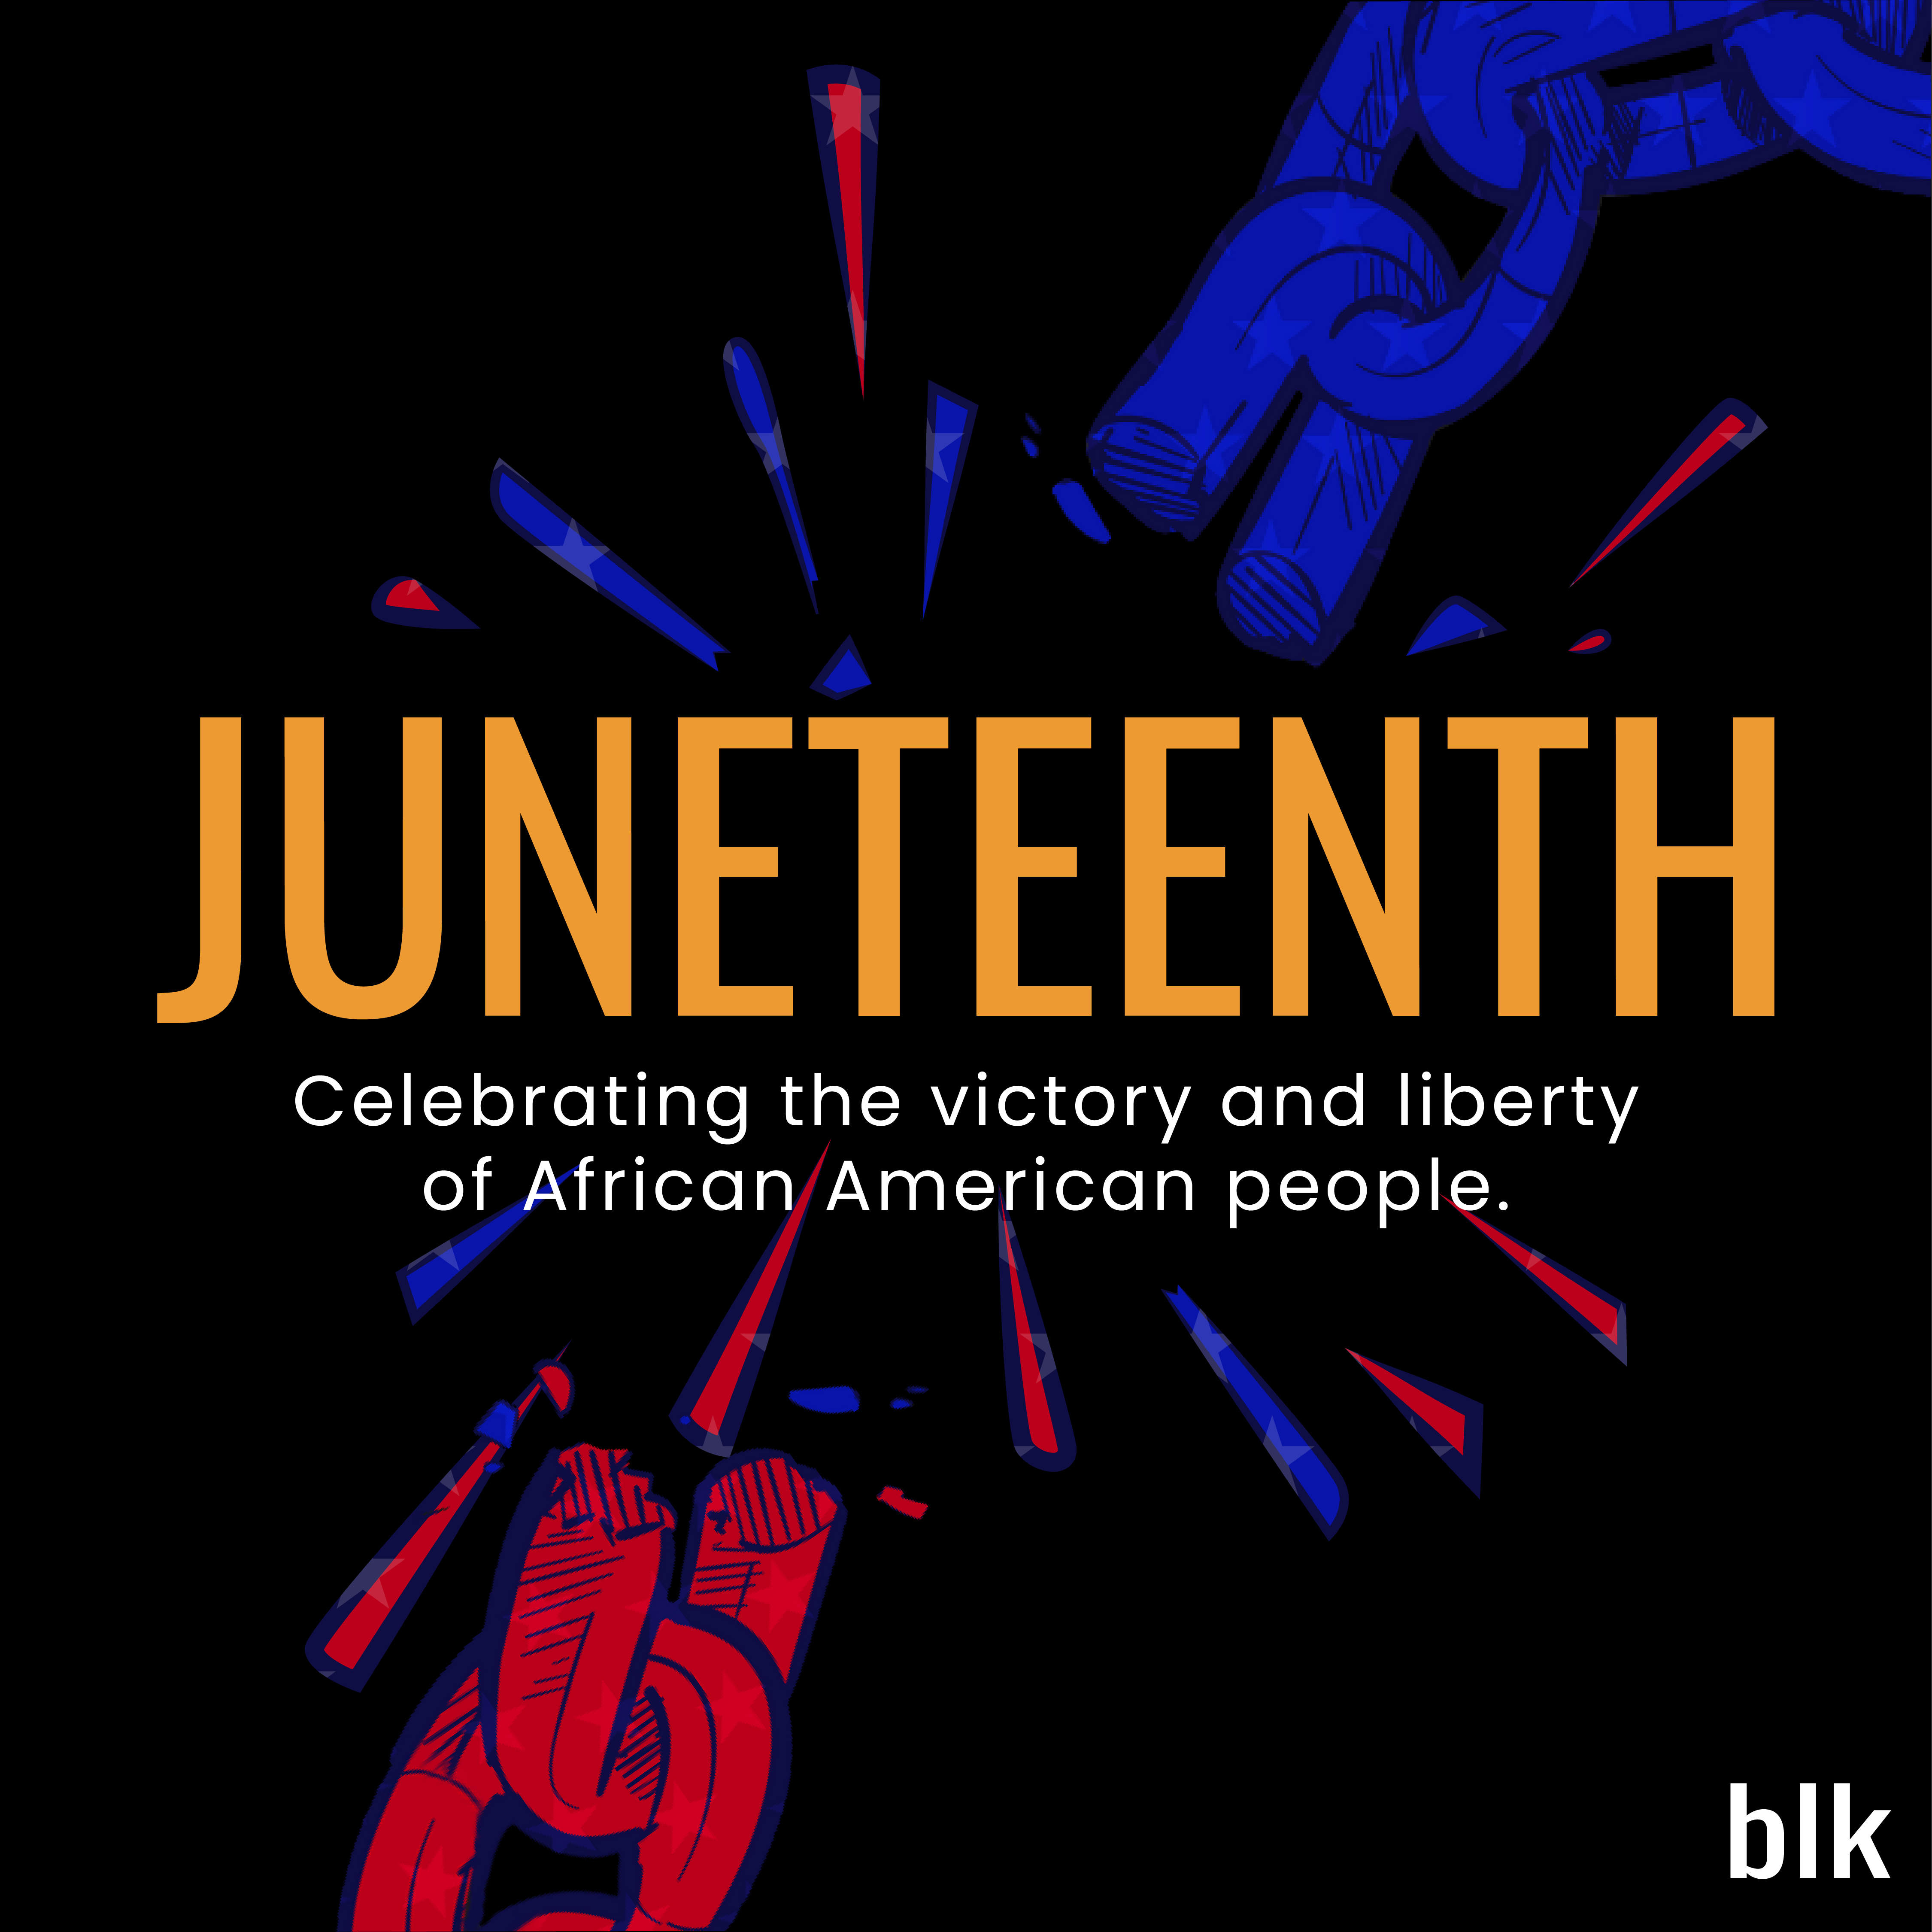 Juneteenth Jubilee Freedom Weekend at the Charles H. Wright Museum of African American History in Detroit - Detroit and Ann Arbor Metro Parent